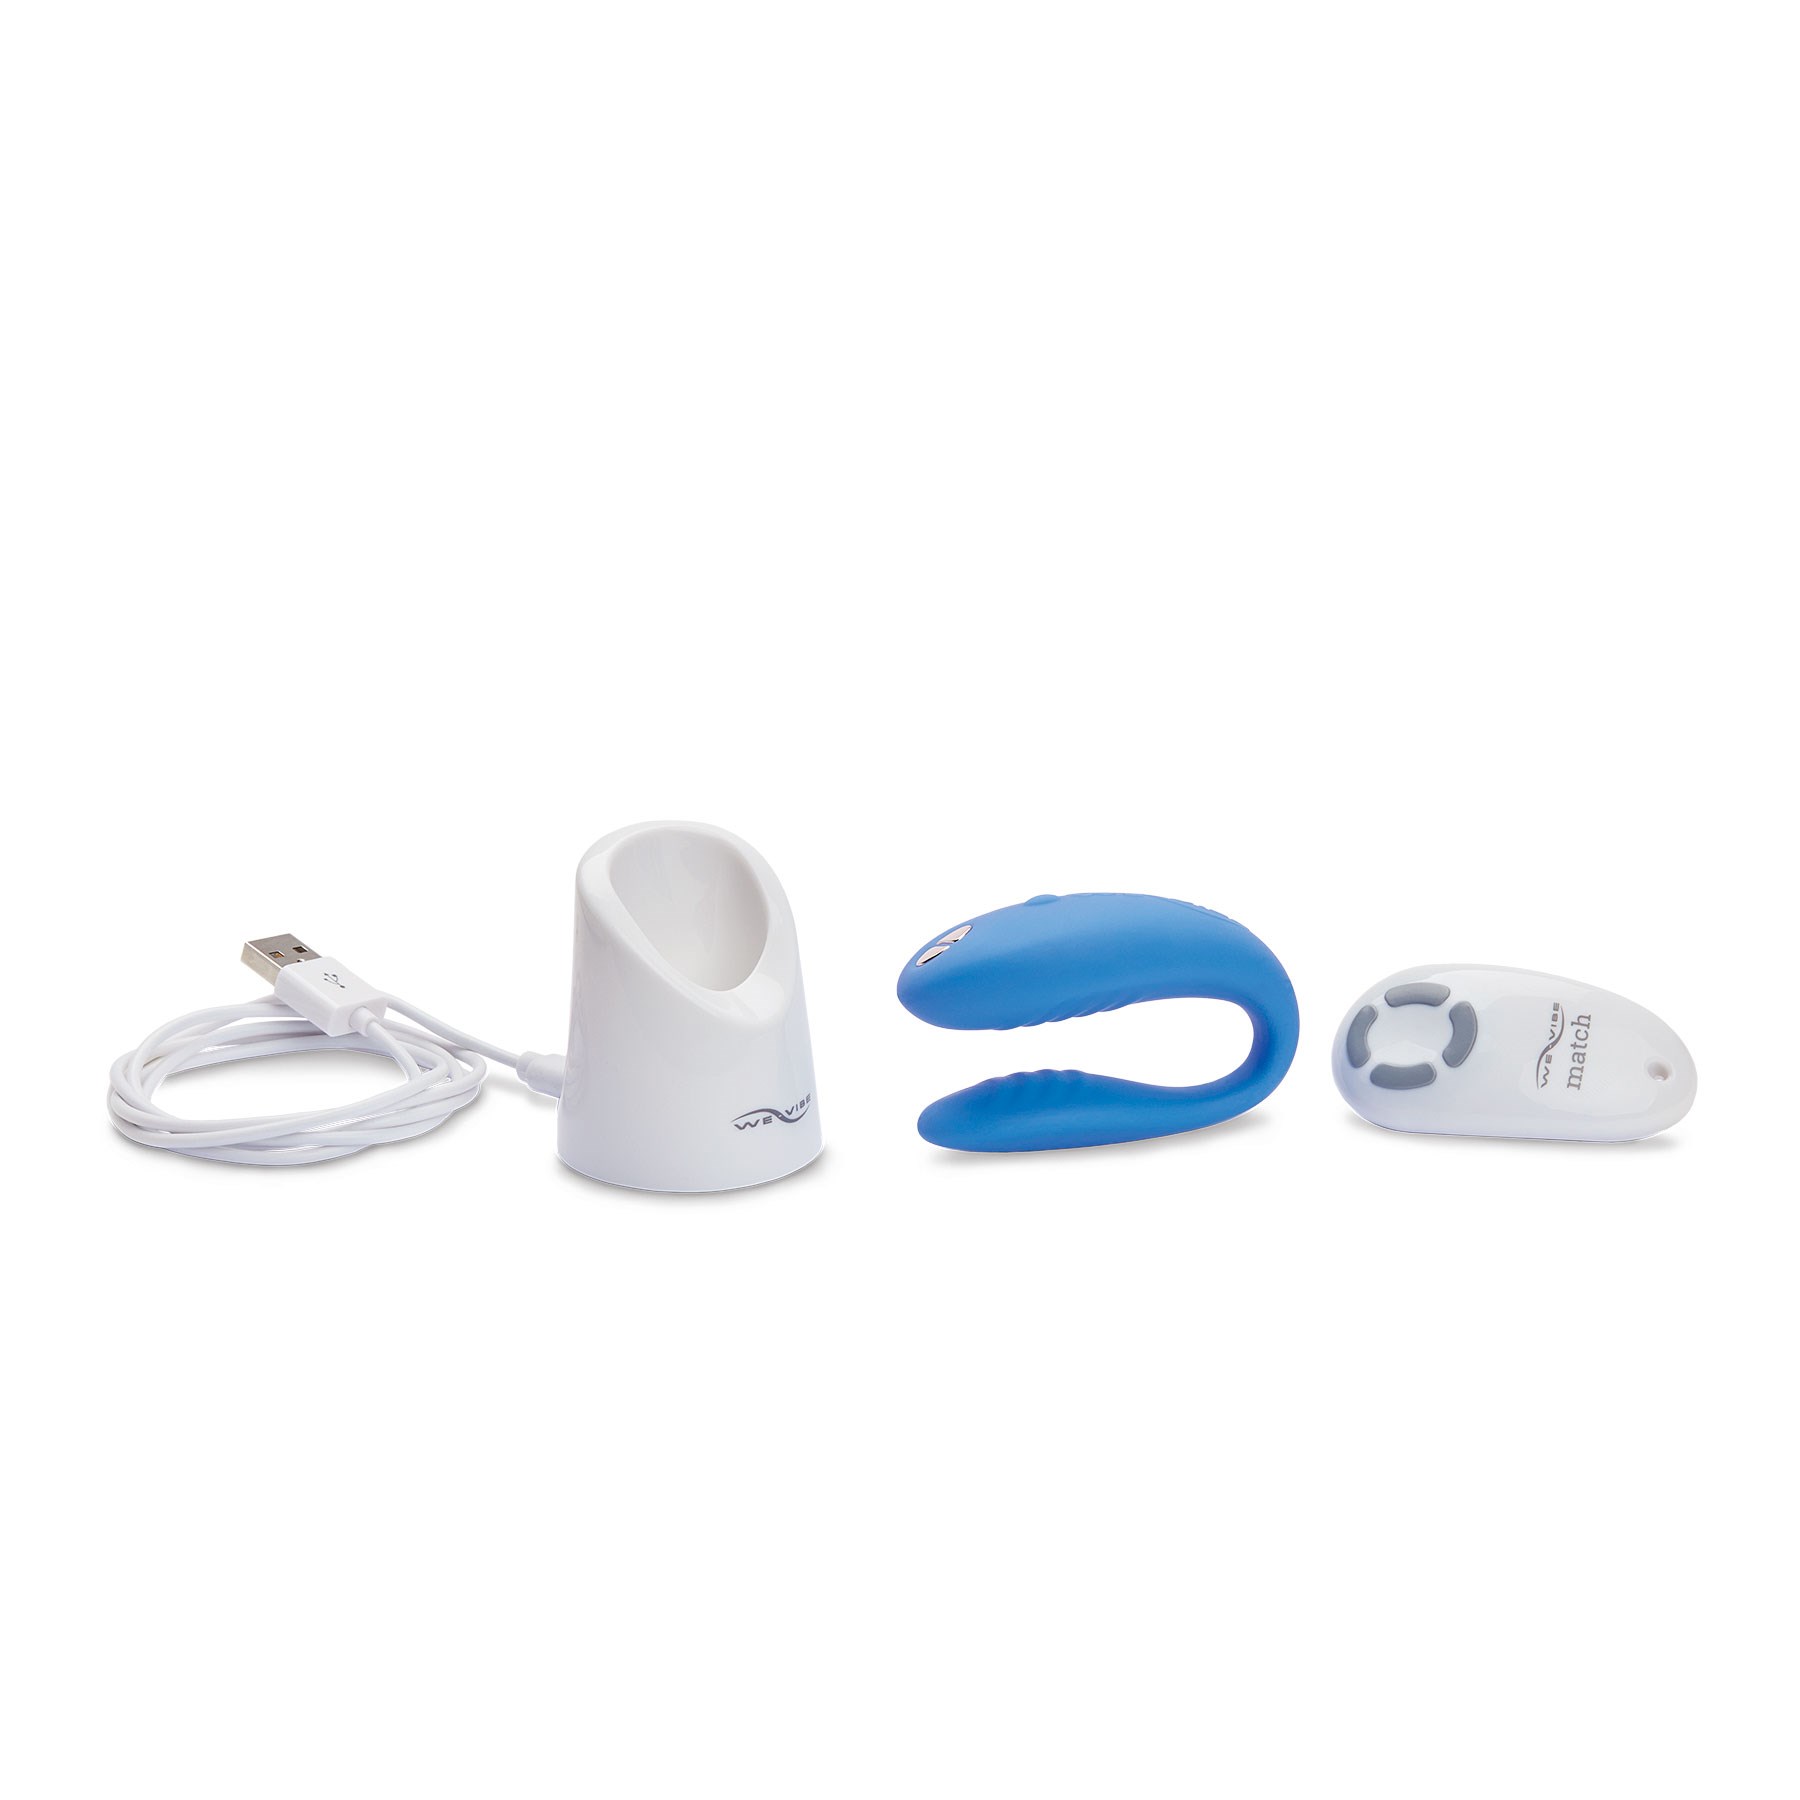 We-Vibe Match Couples Massager all components